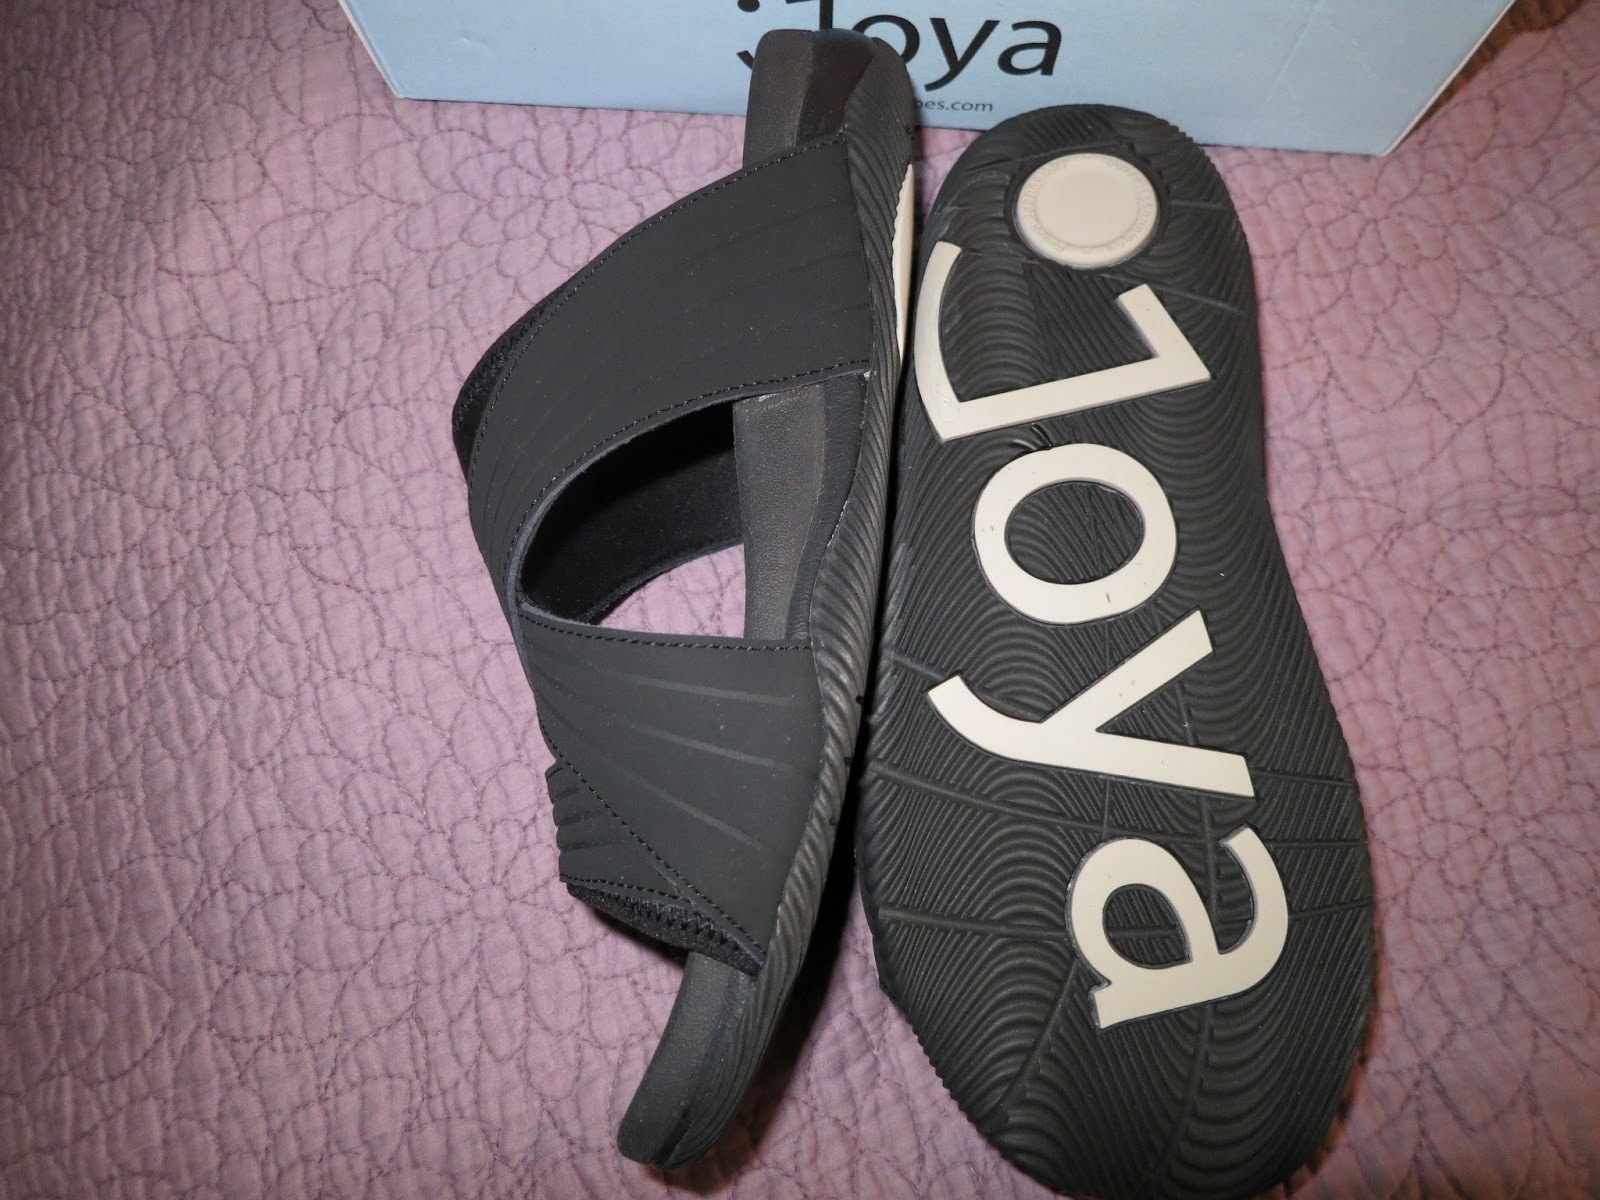 Ask Away Blog: Joya Shoes Review & *Giveaway* Ends 7/16